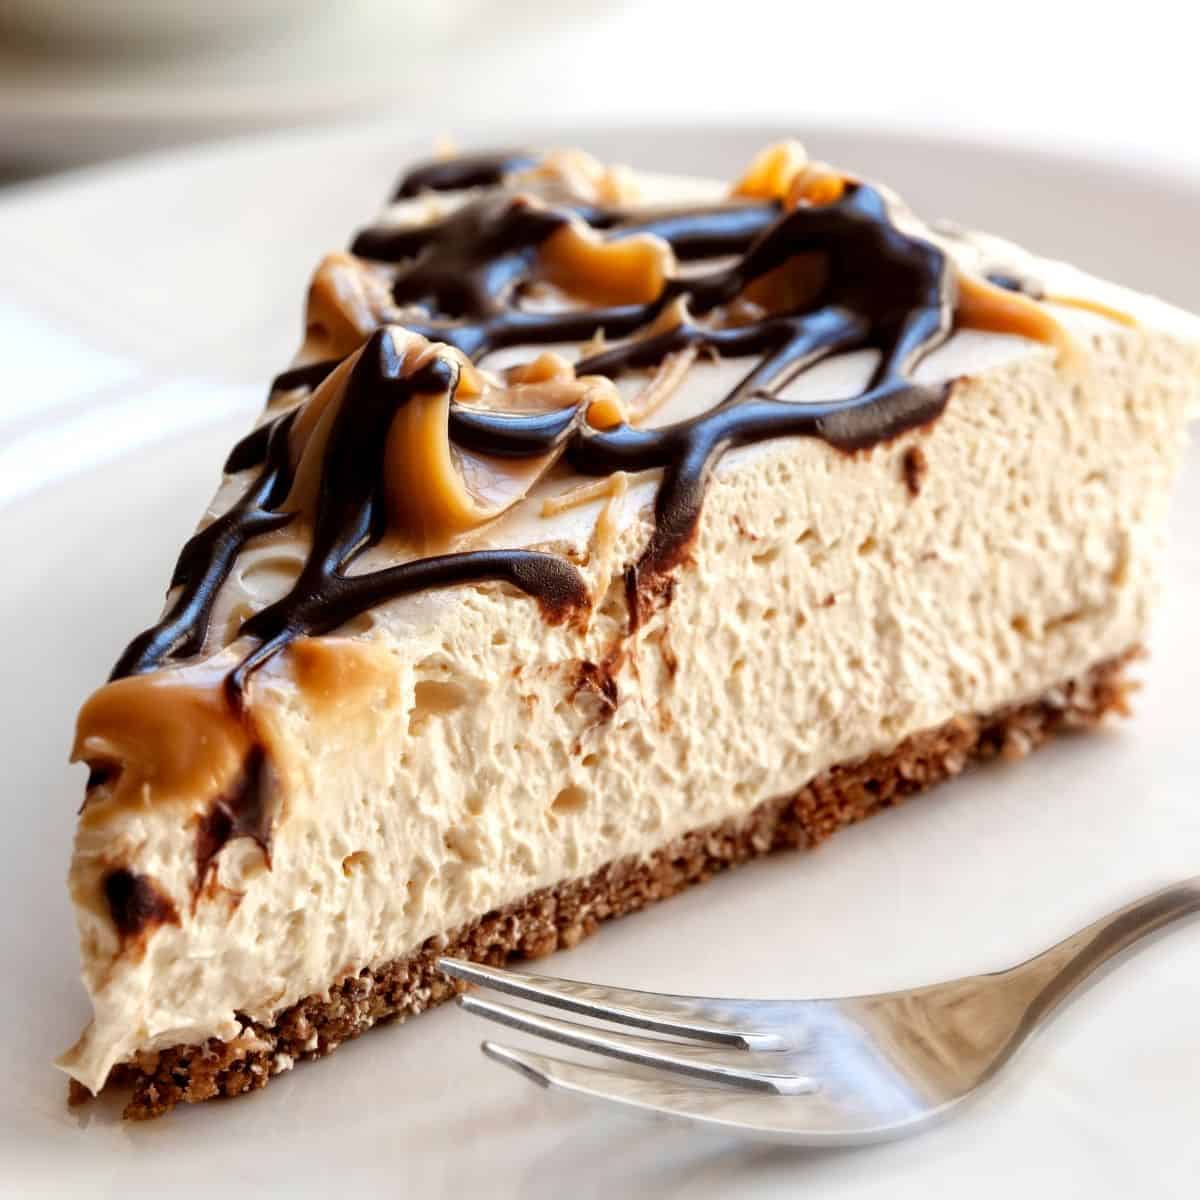 Best Cheesecake Topping Ideas - My Serenity